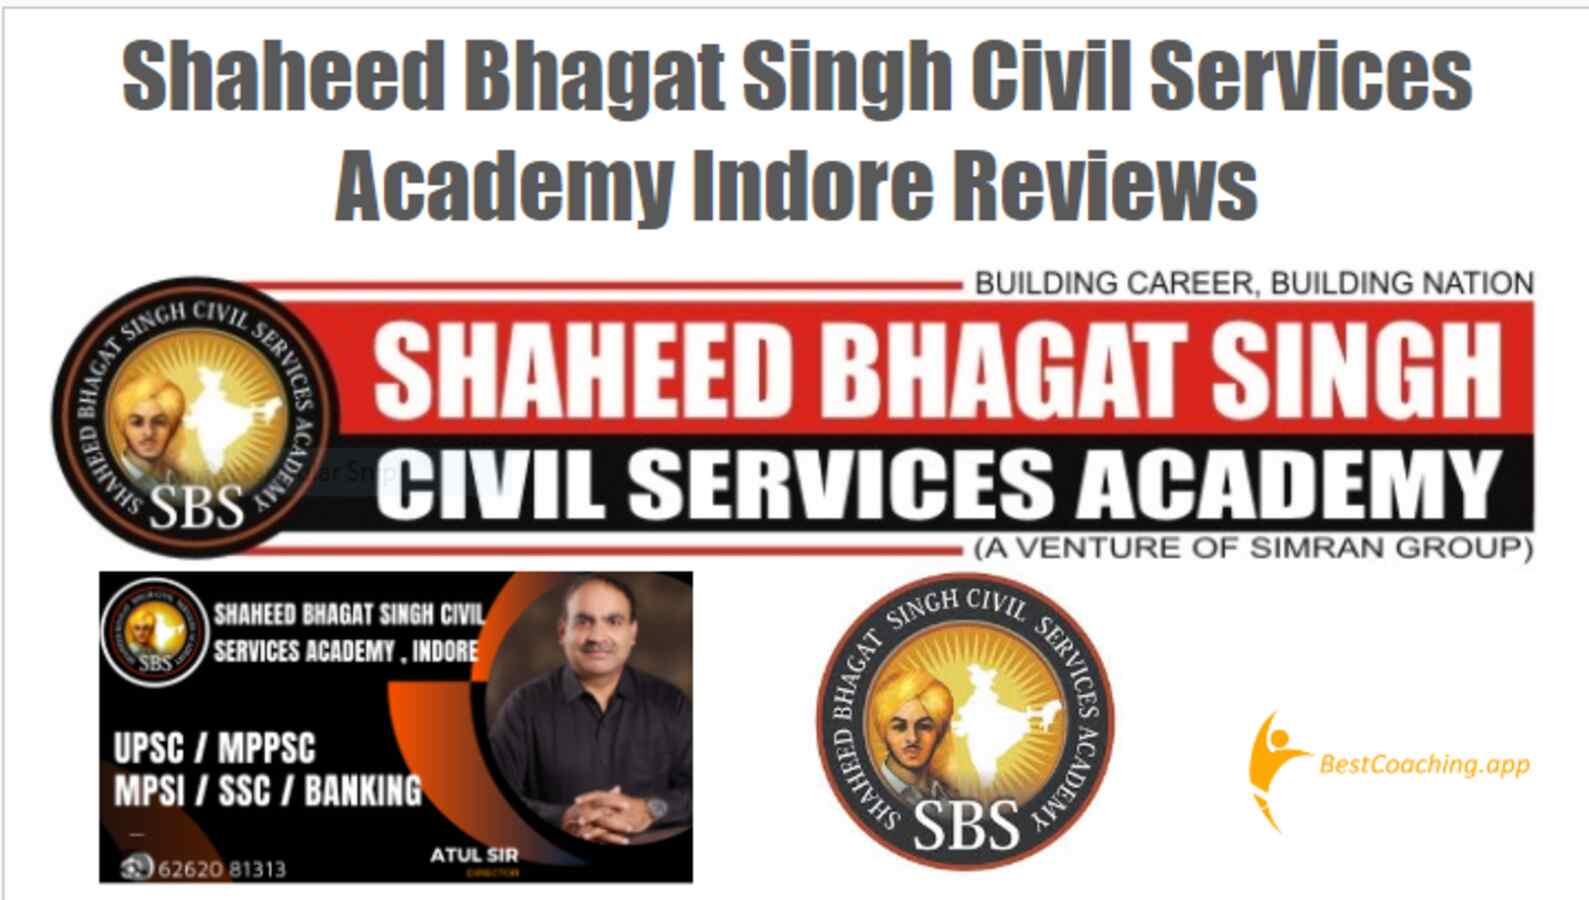 Shaheed Bhagat Singh Civil Services Academy Indore reviews